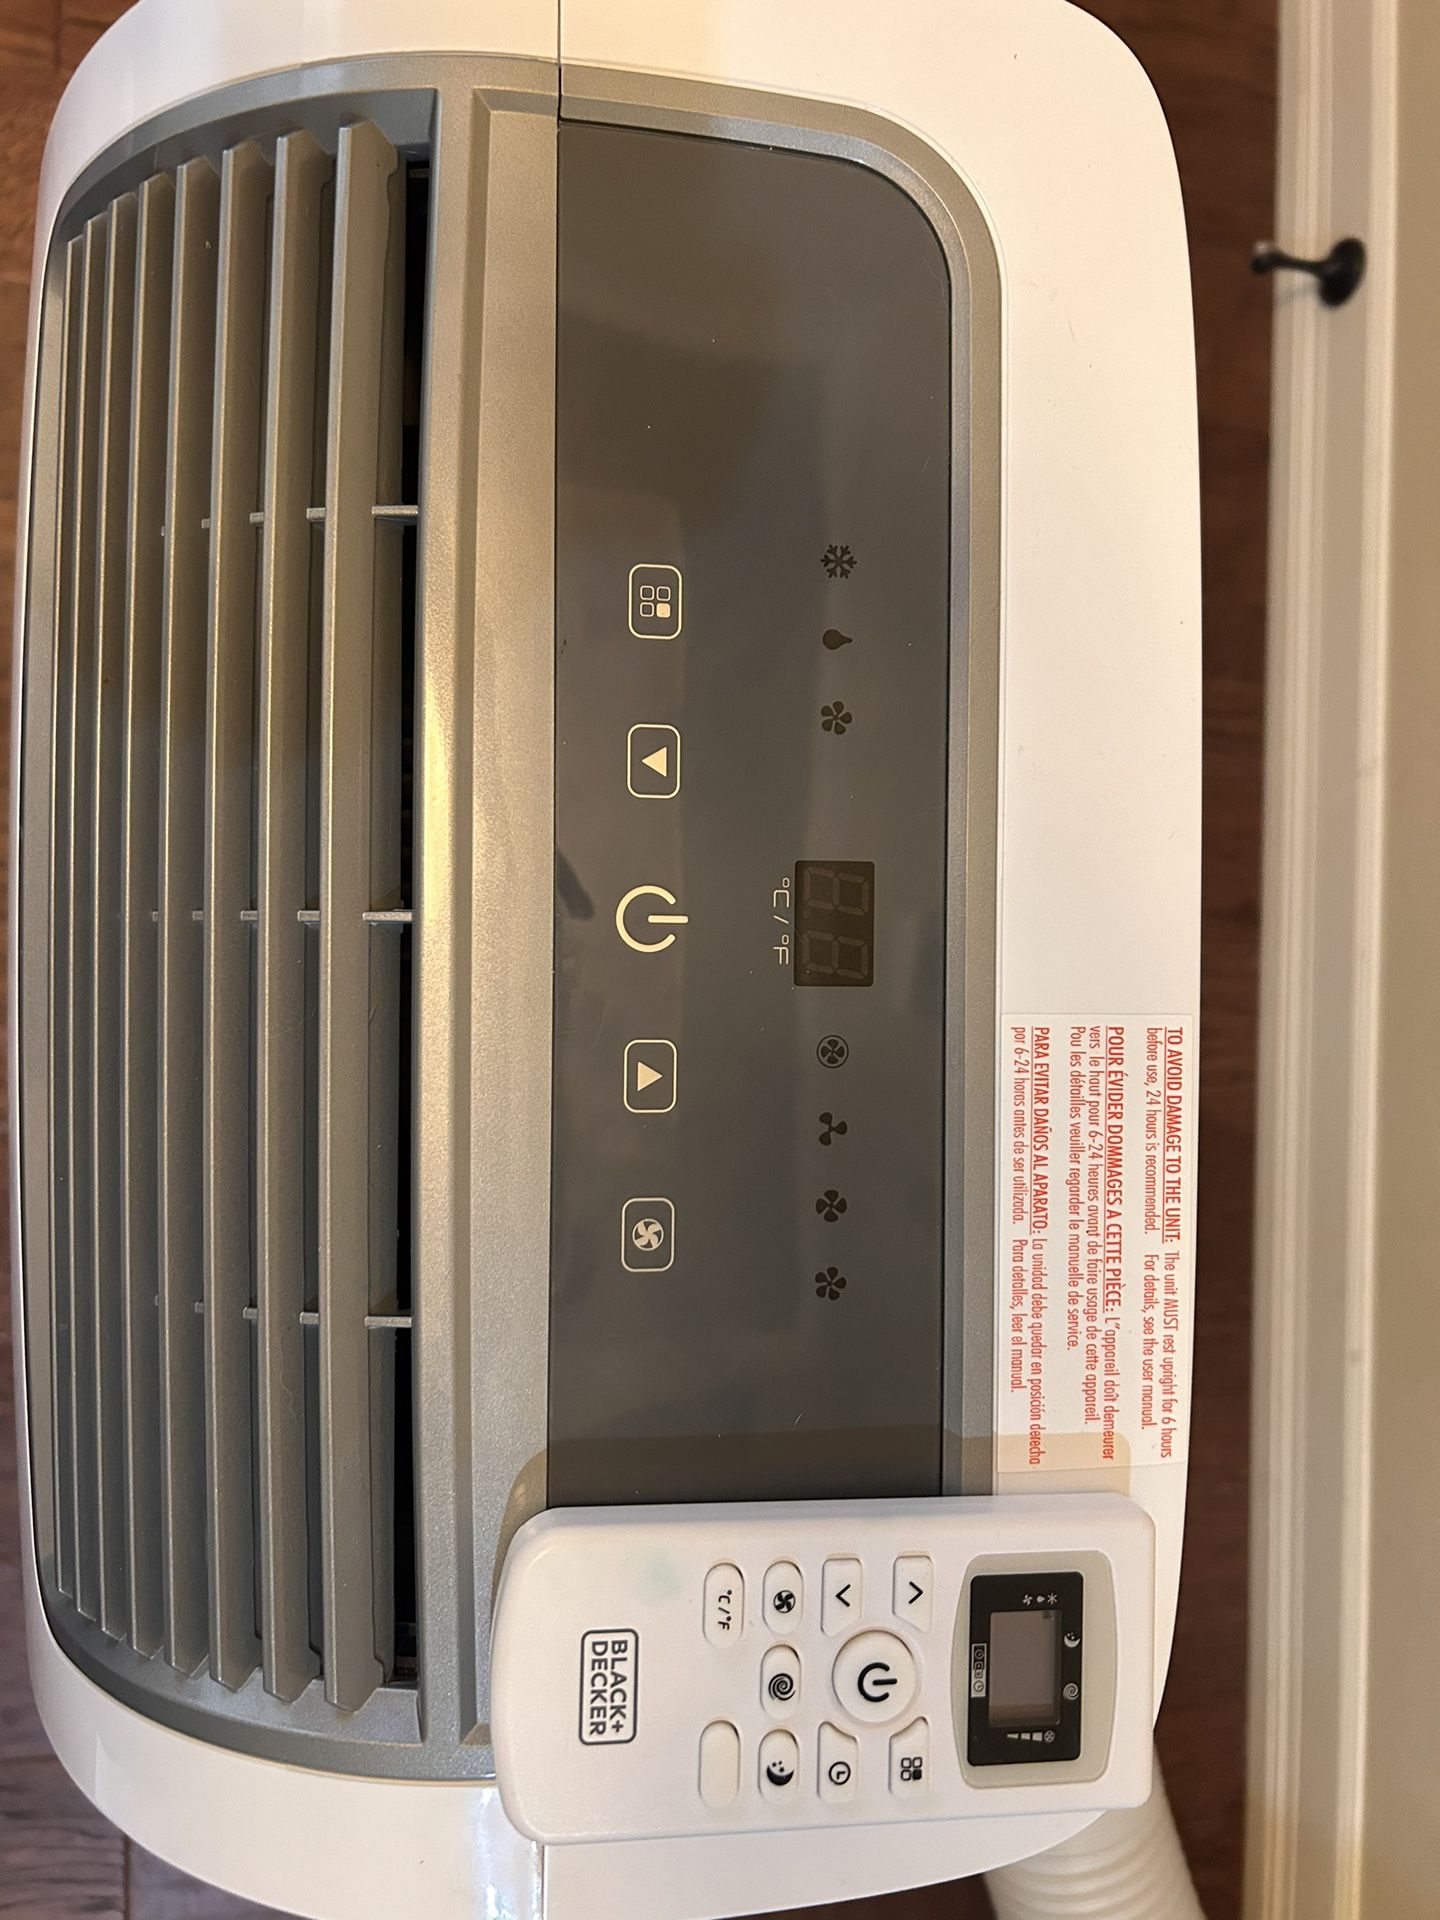 Black and Decker Portable Air Conditioner for Sale in Tumwater, WA